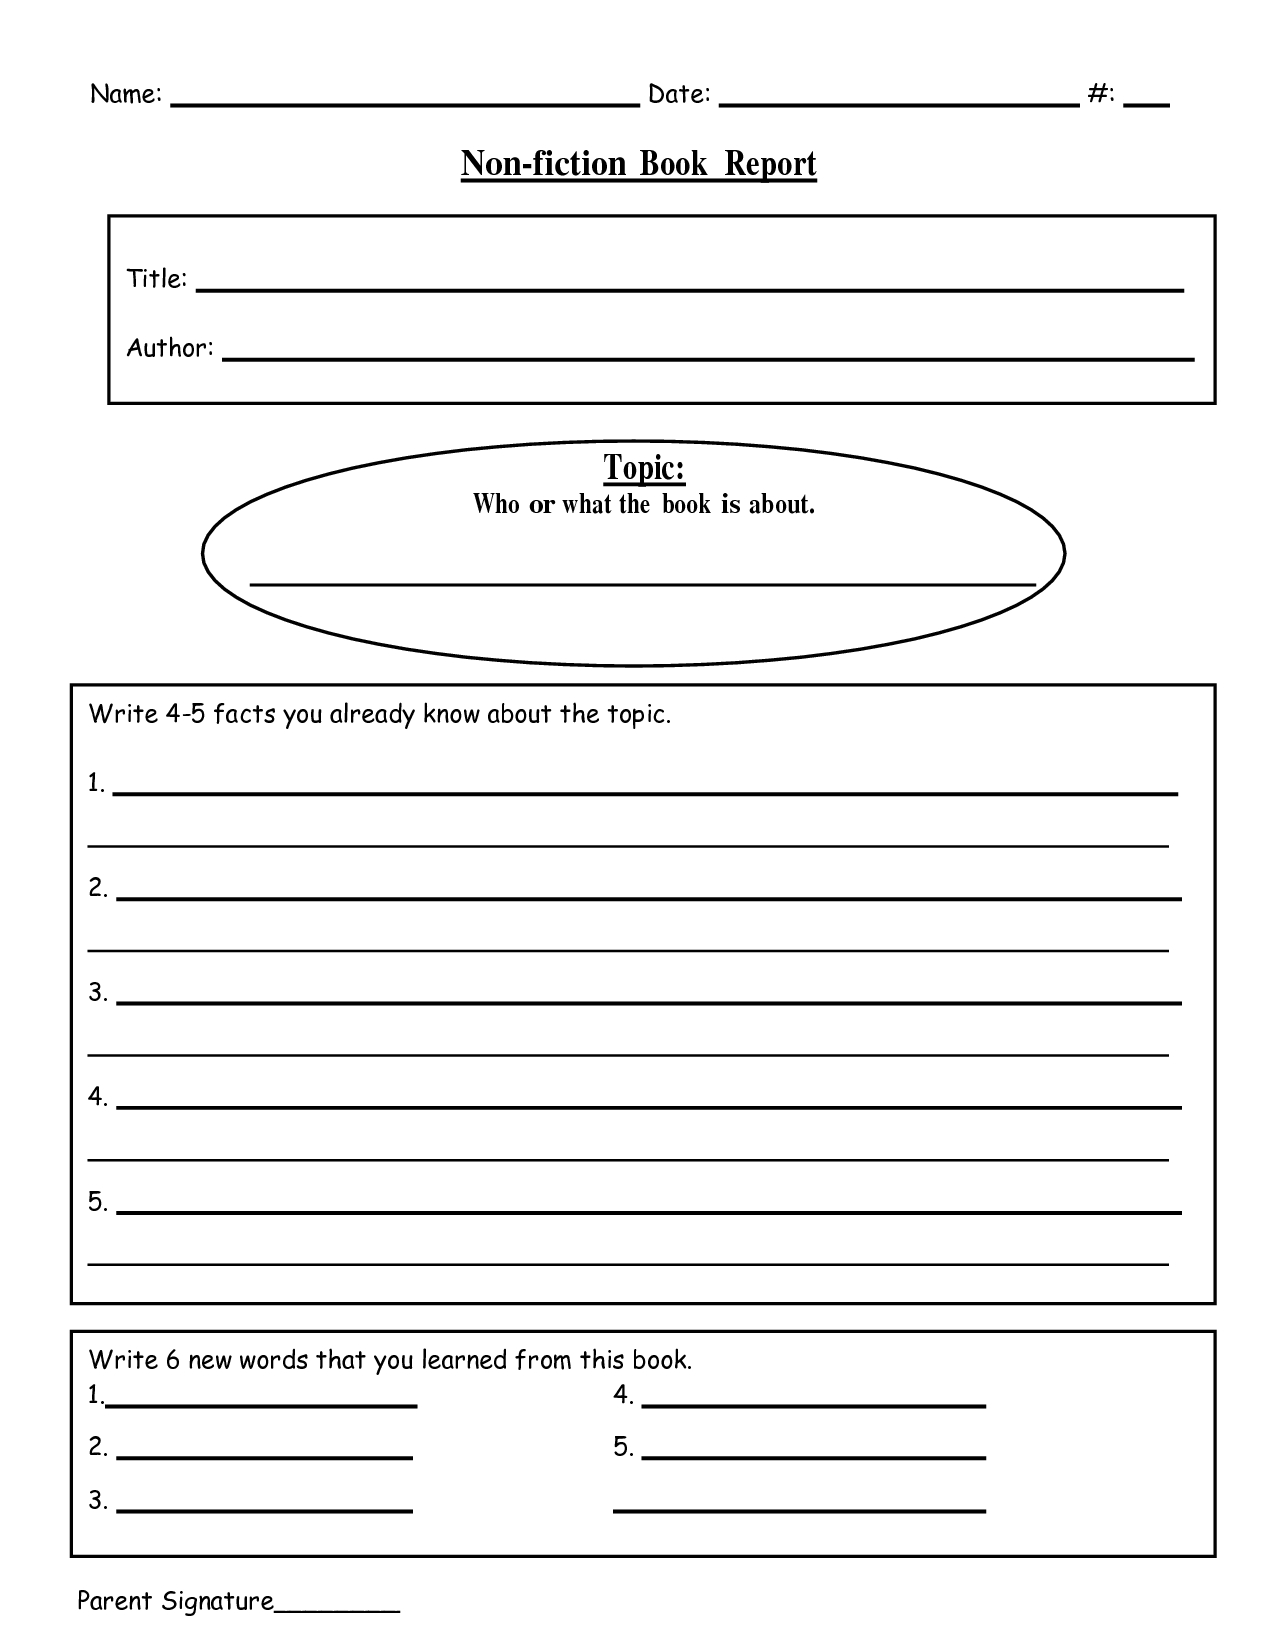 28 Images Of 5Th Grade Non Fiction Book Report Template For Book Report Template 5Th Grade